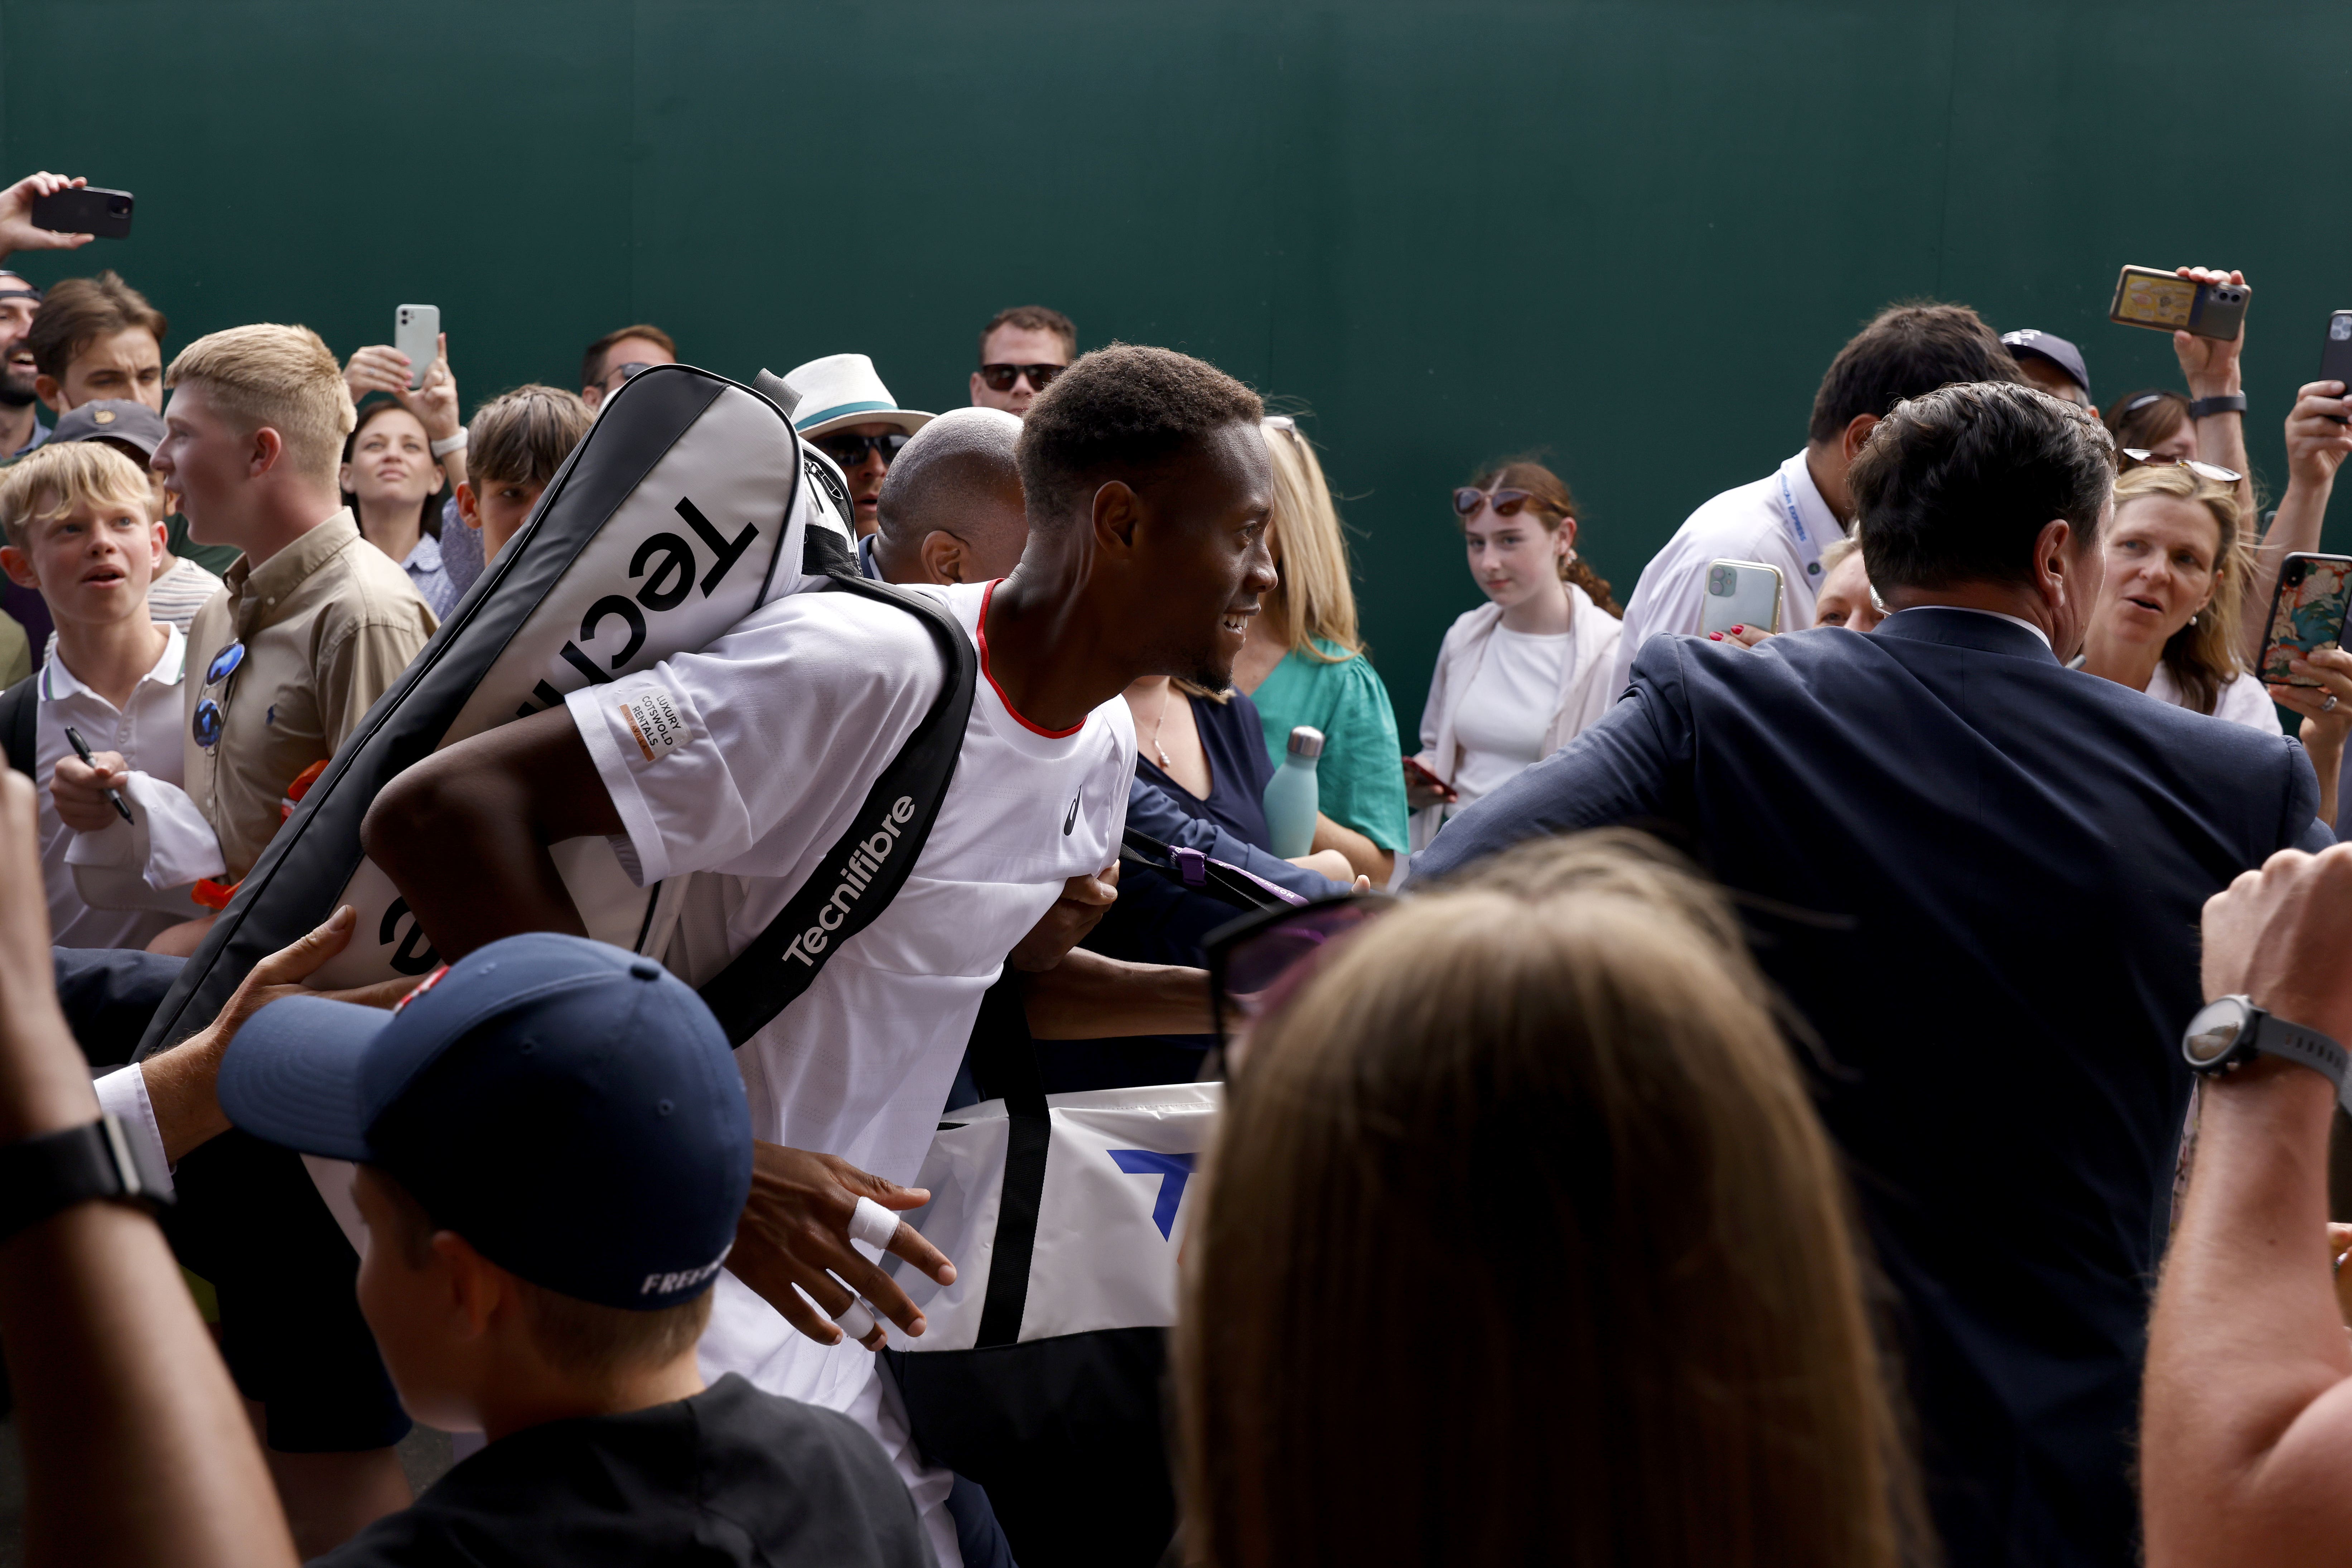 Chris Eubank has picked up a lot of new fans at Wimbledon on his way to a quarter-final place (Steven Paston/PA)